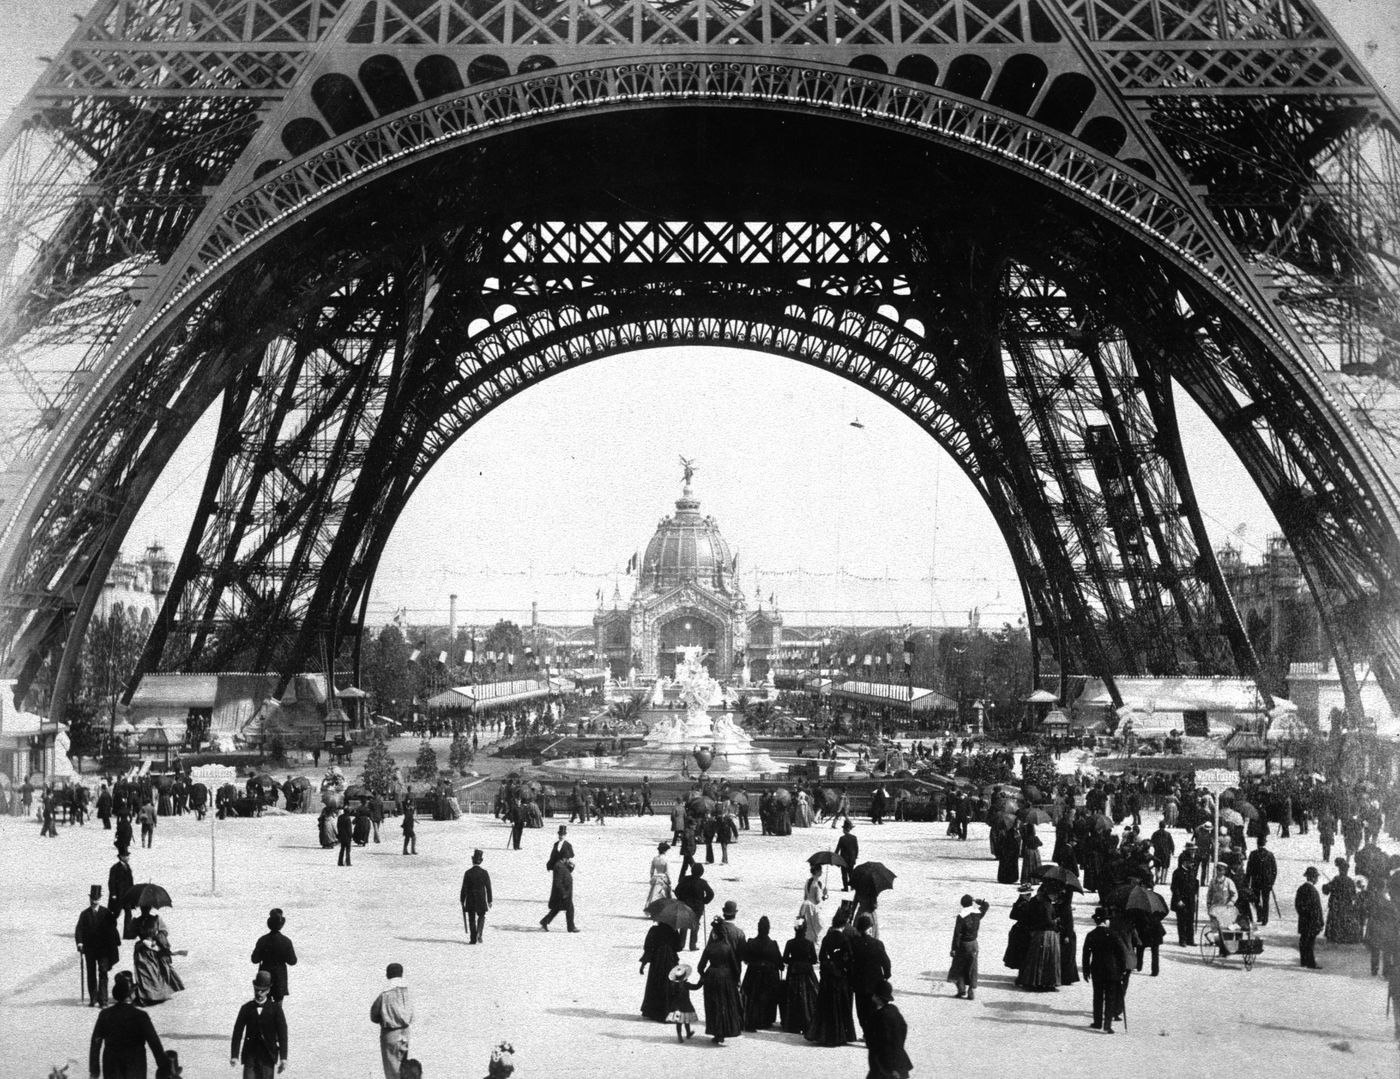 Exposition universelle de 1889 (Paris, France): View of the base of the Eiffel Tower with crowds beneath